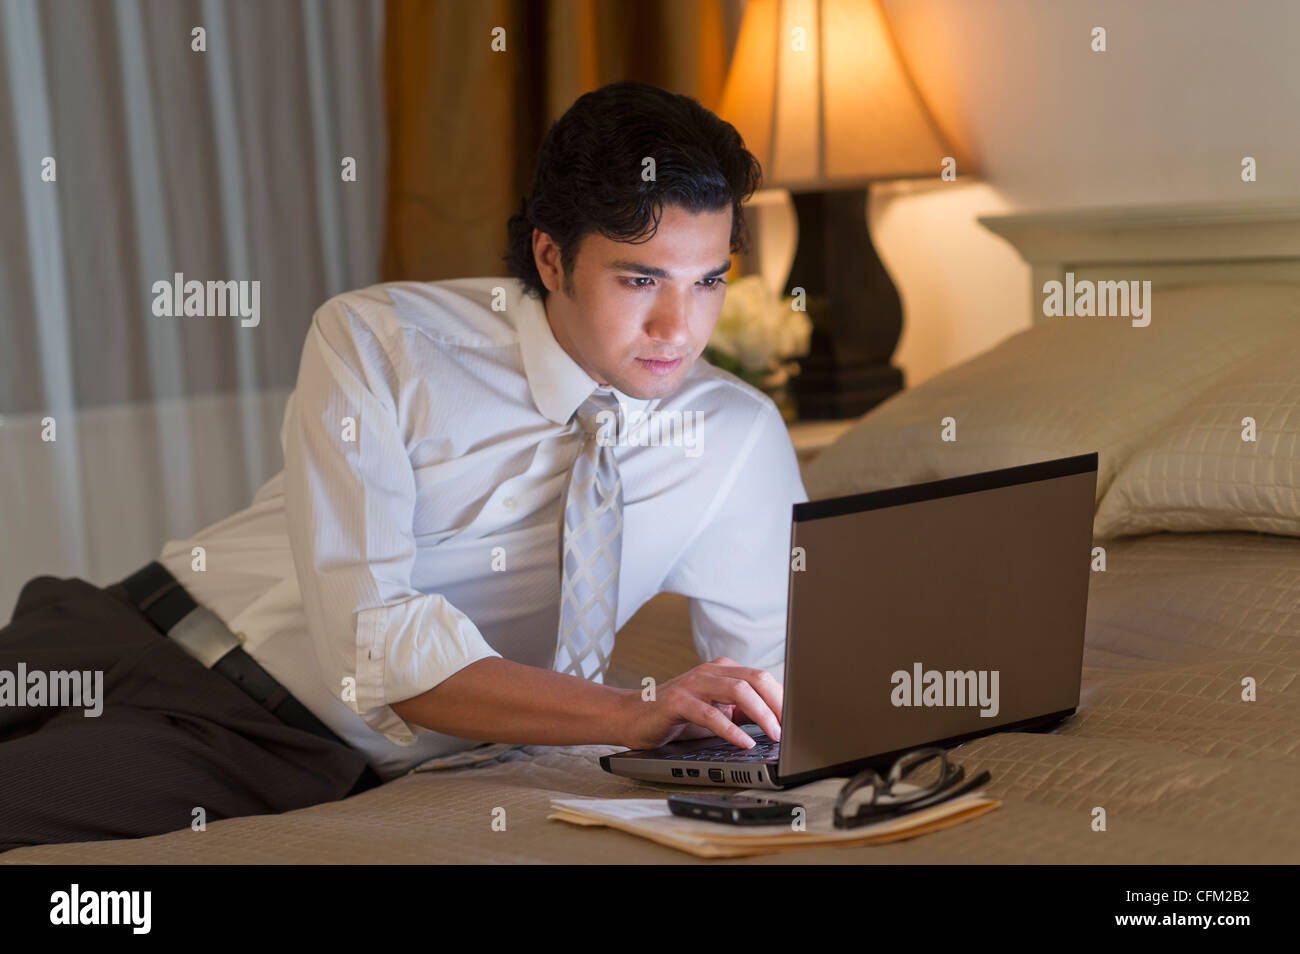 USA, New Jersey, Jersey City, Businessman working on laptop in hotel room Stock Photo